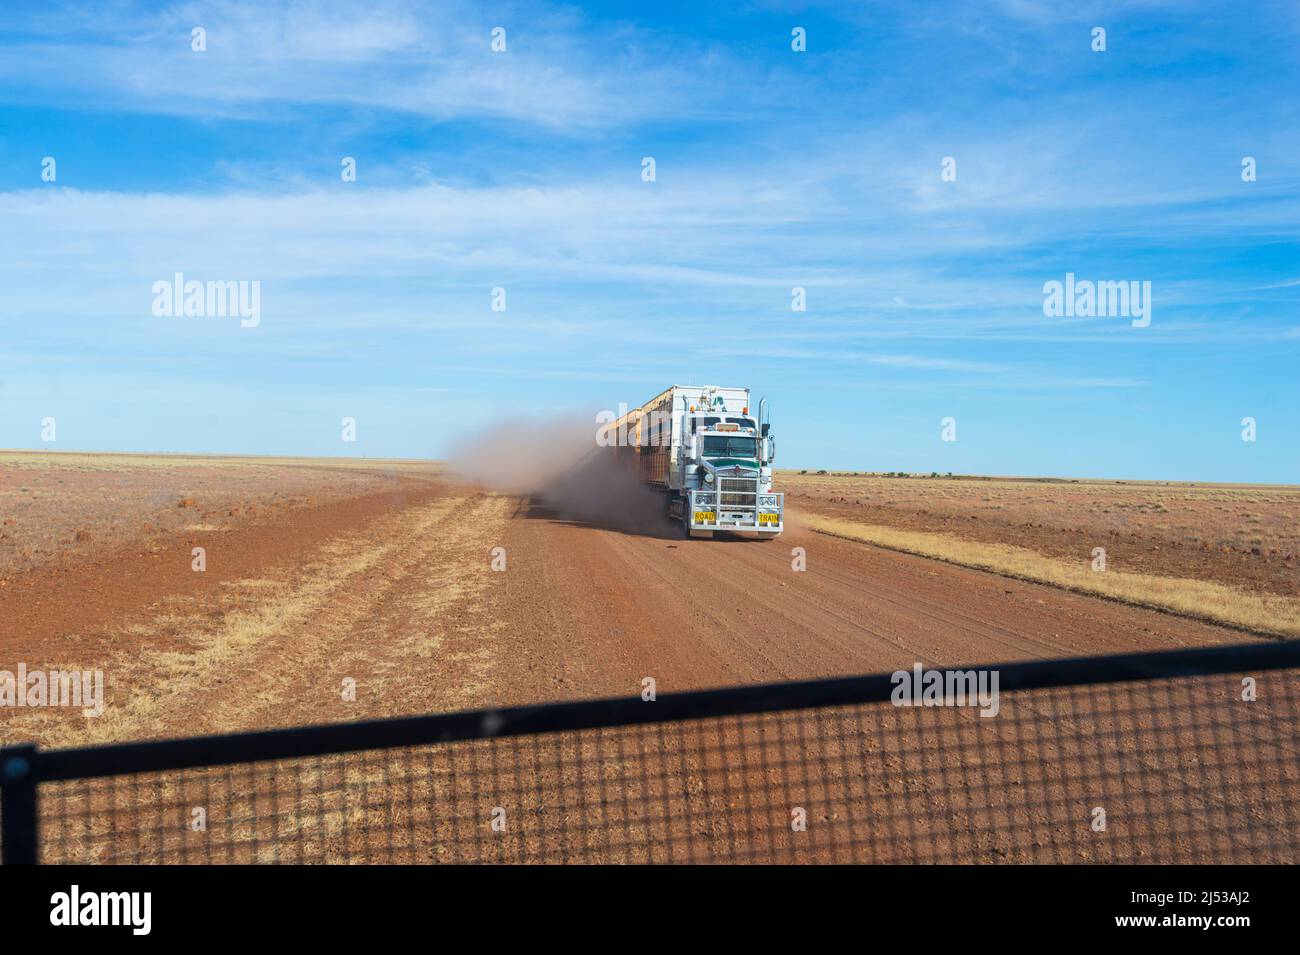 Cattle truck kicking dust on the historic Barkly Stock Route, Barkly Tablelands, Northern Territory, NT, Australia Stock Photo